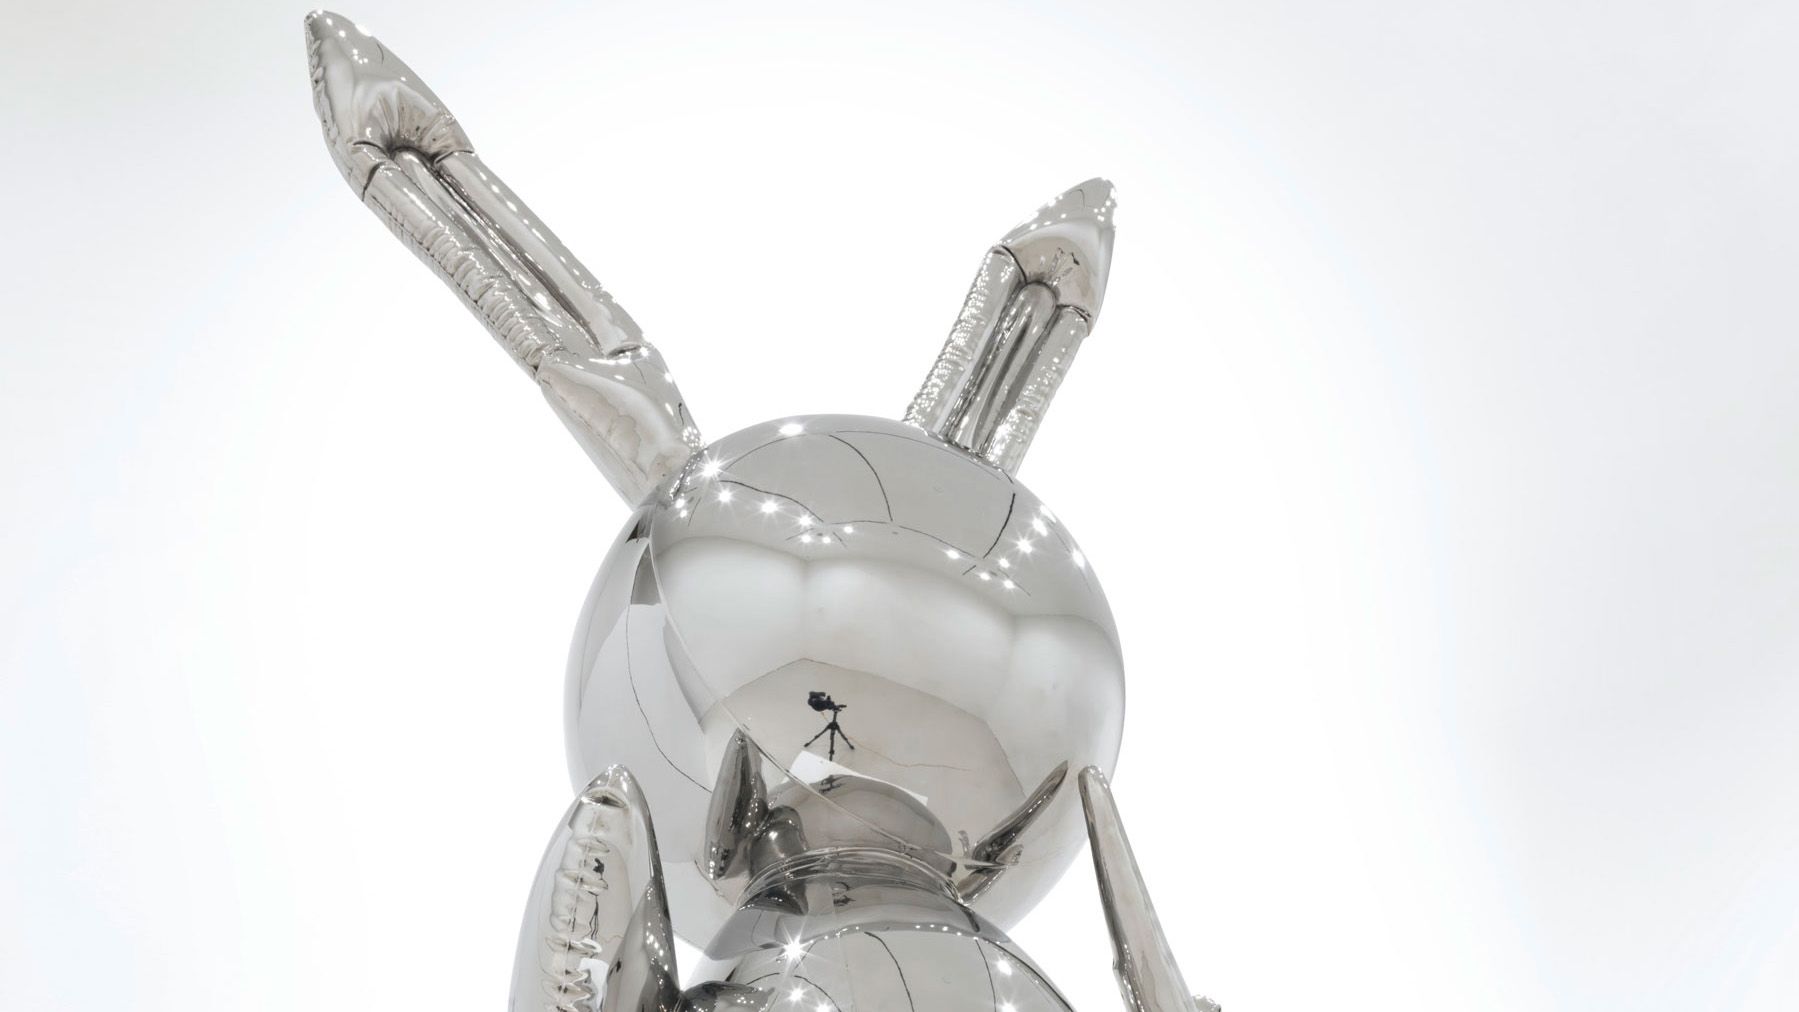 Jeff Koons: An Artist, Wrapped In A Mystery, Inside Shiny Stainless Steel